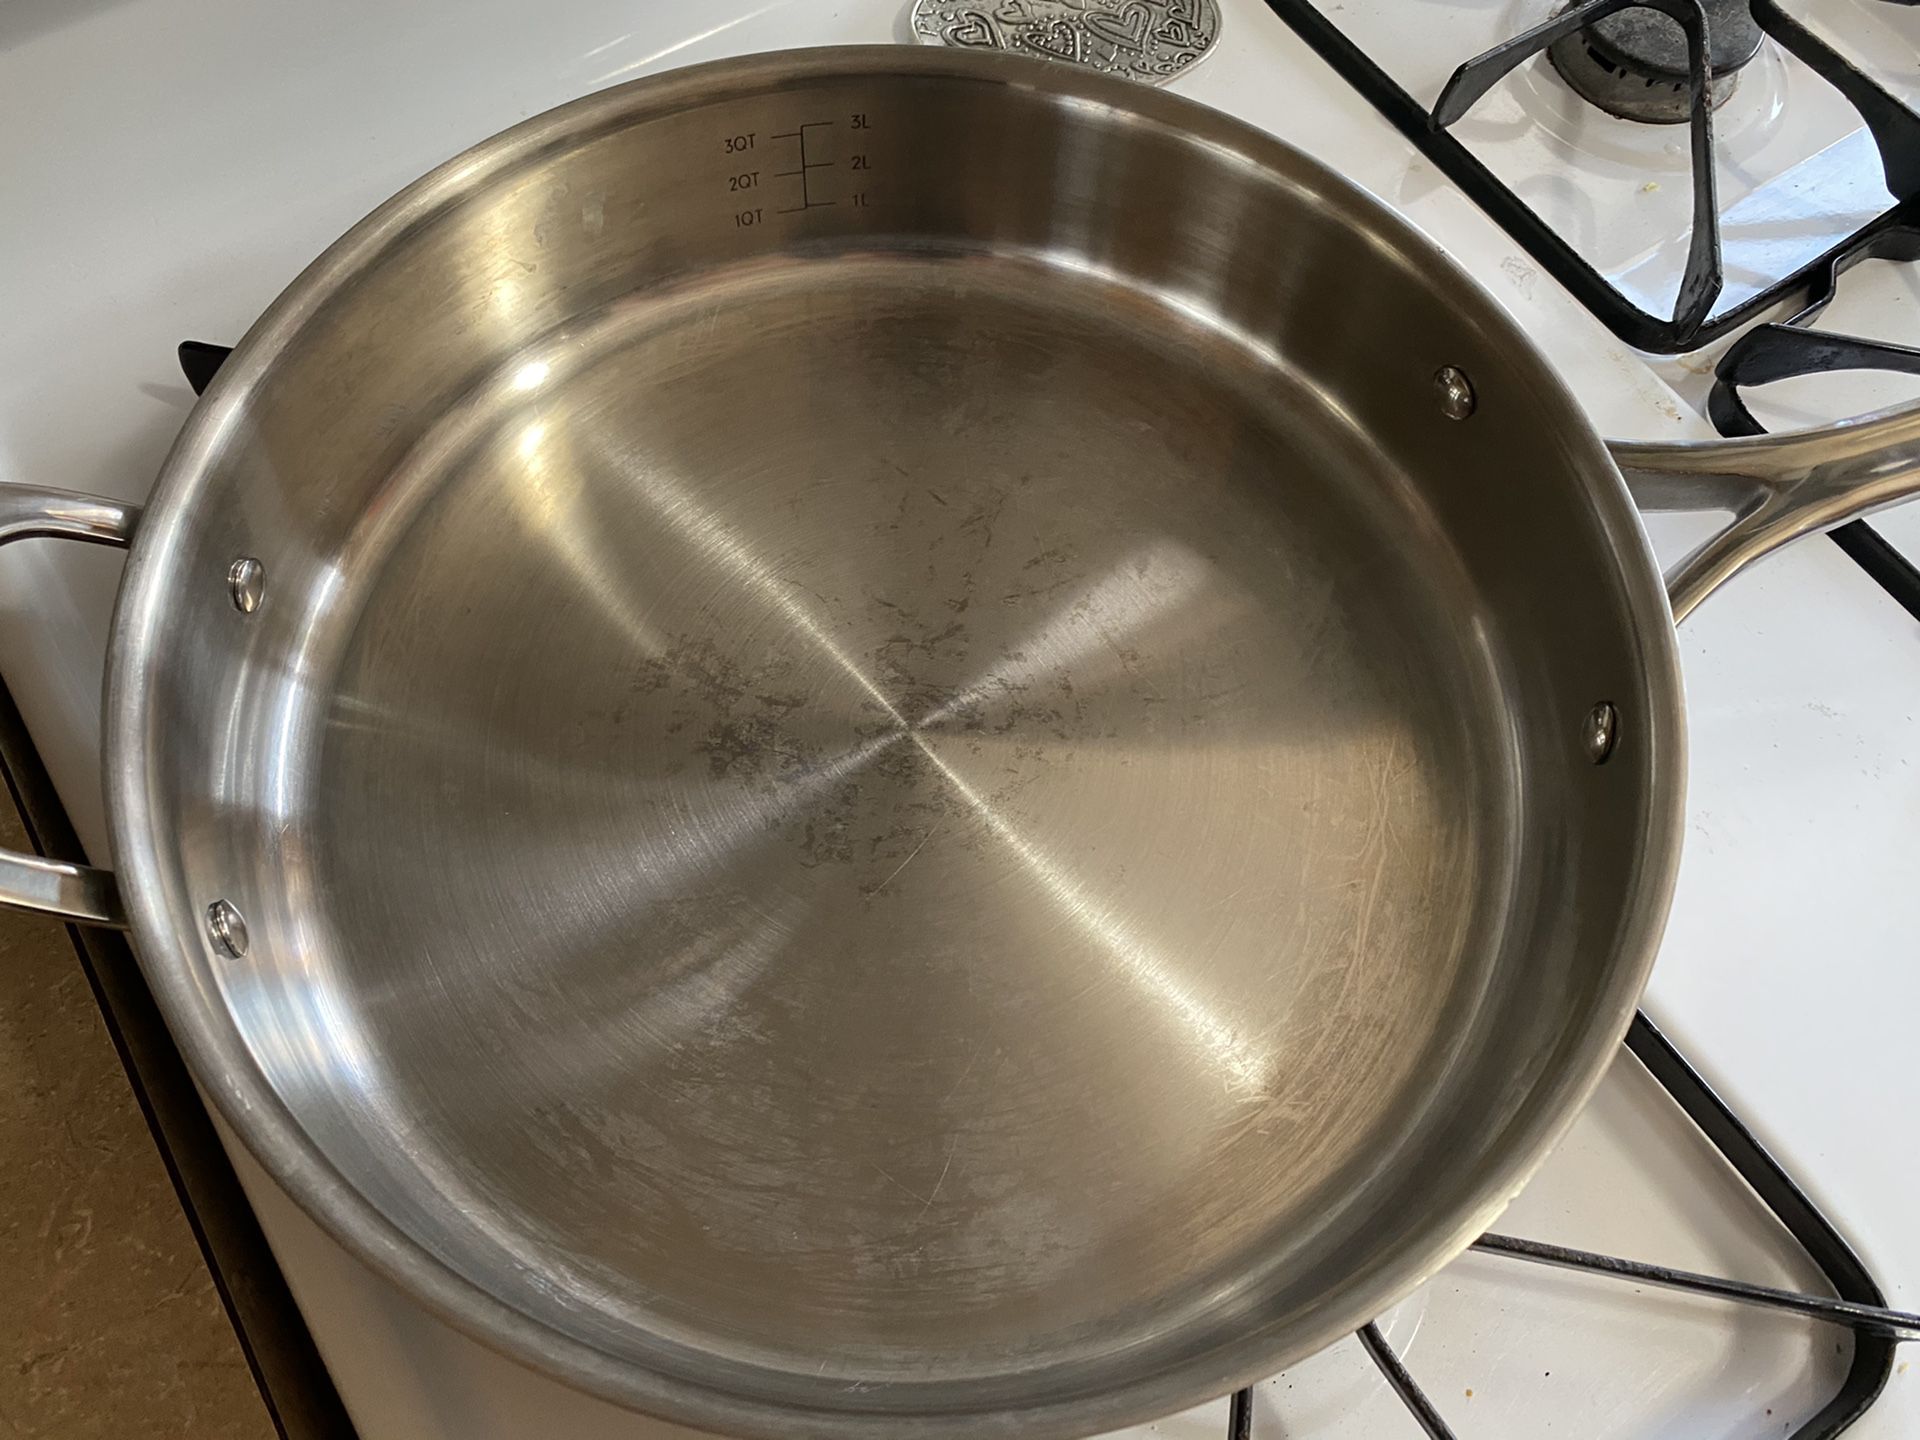 Pampered Chef Stainless Steel 12 Inch Skillet with Glass Lid